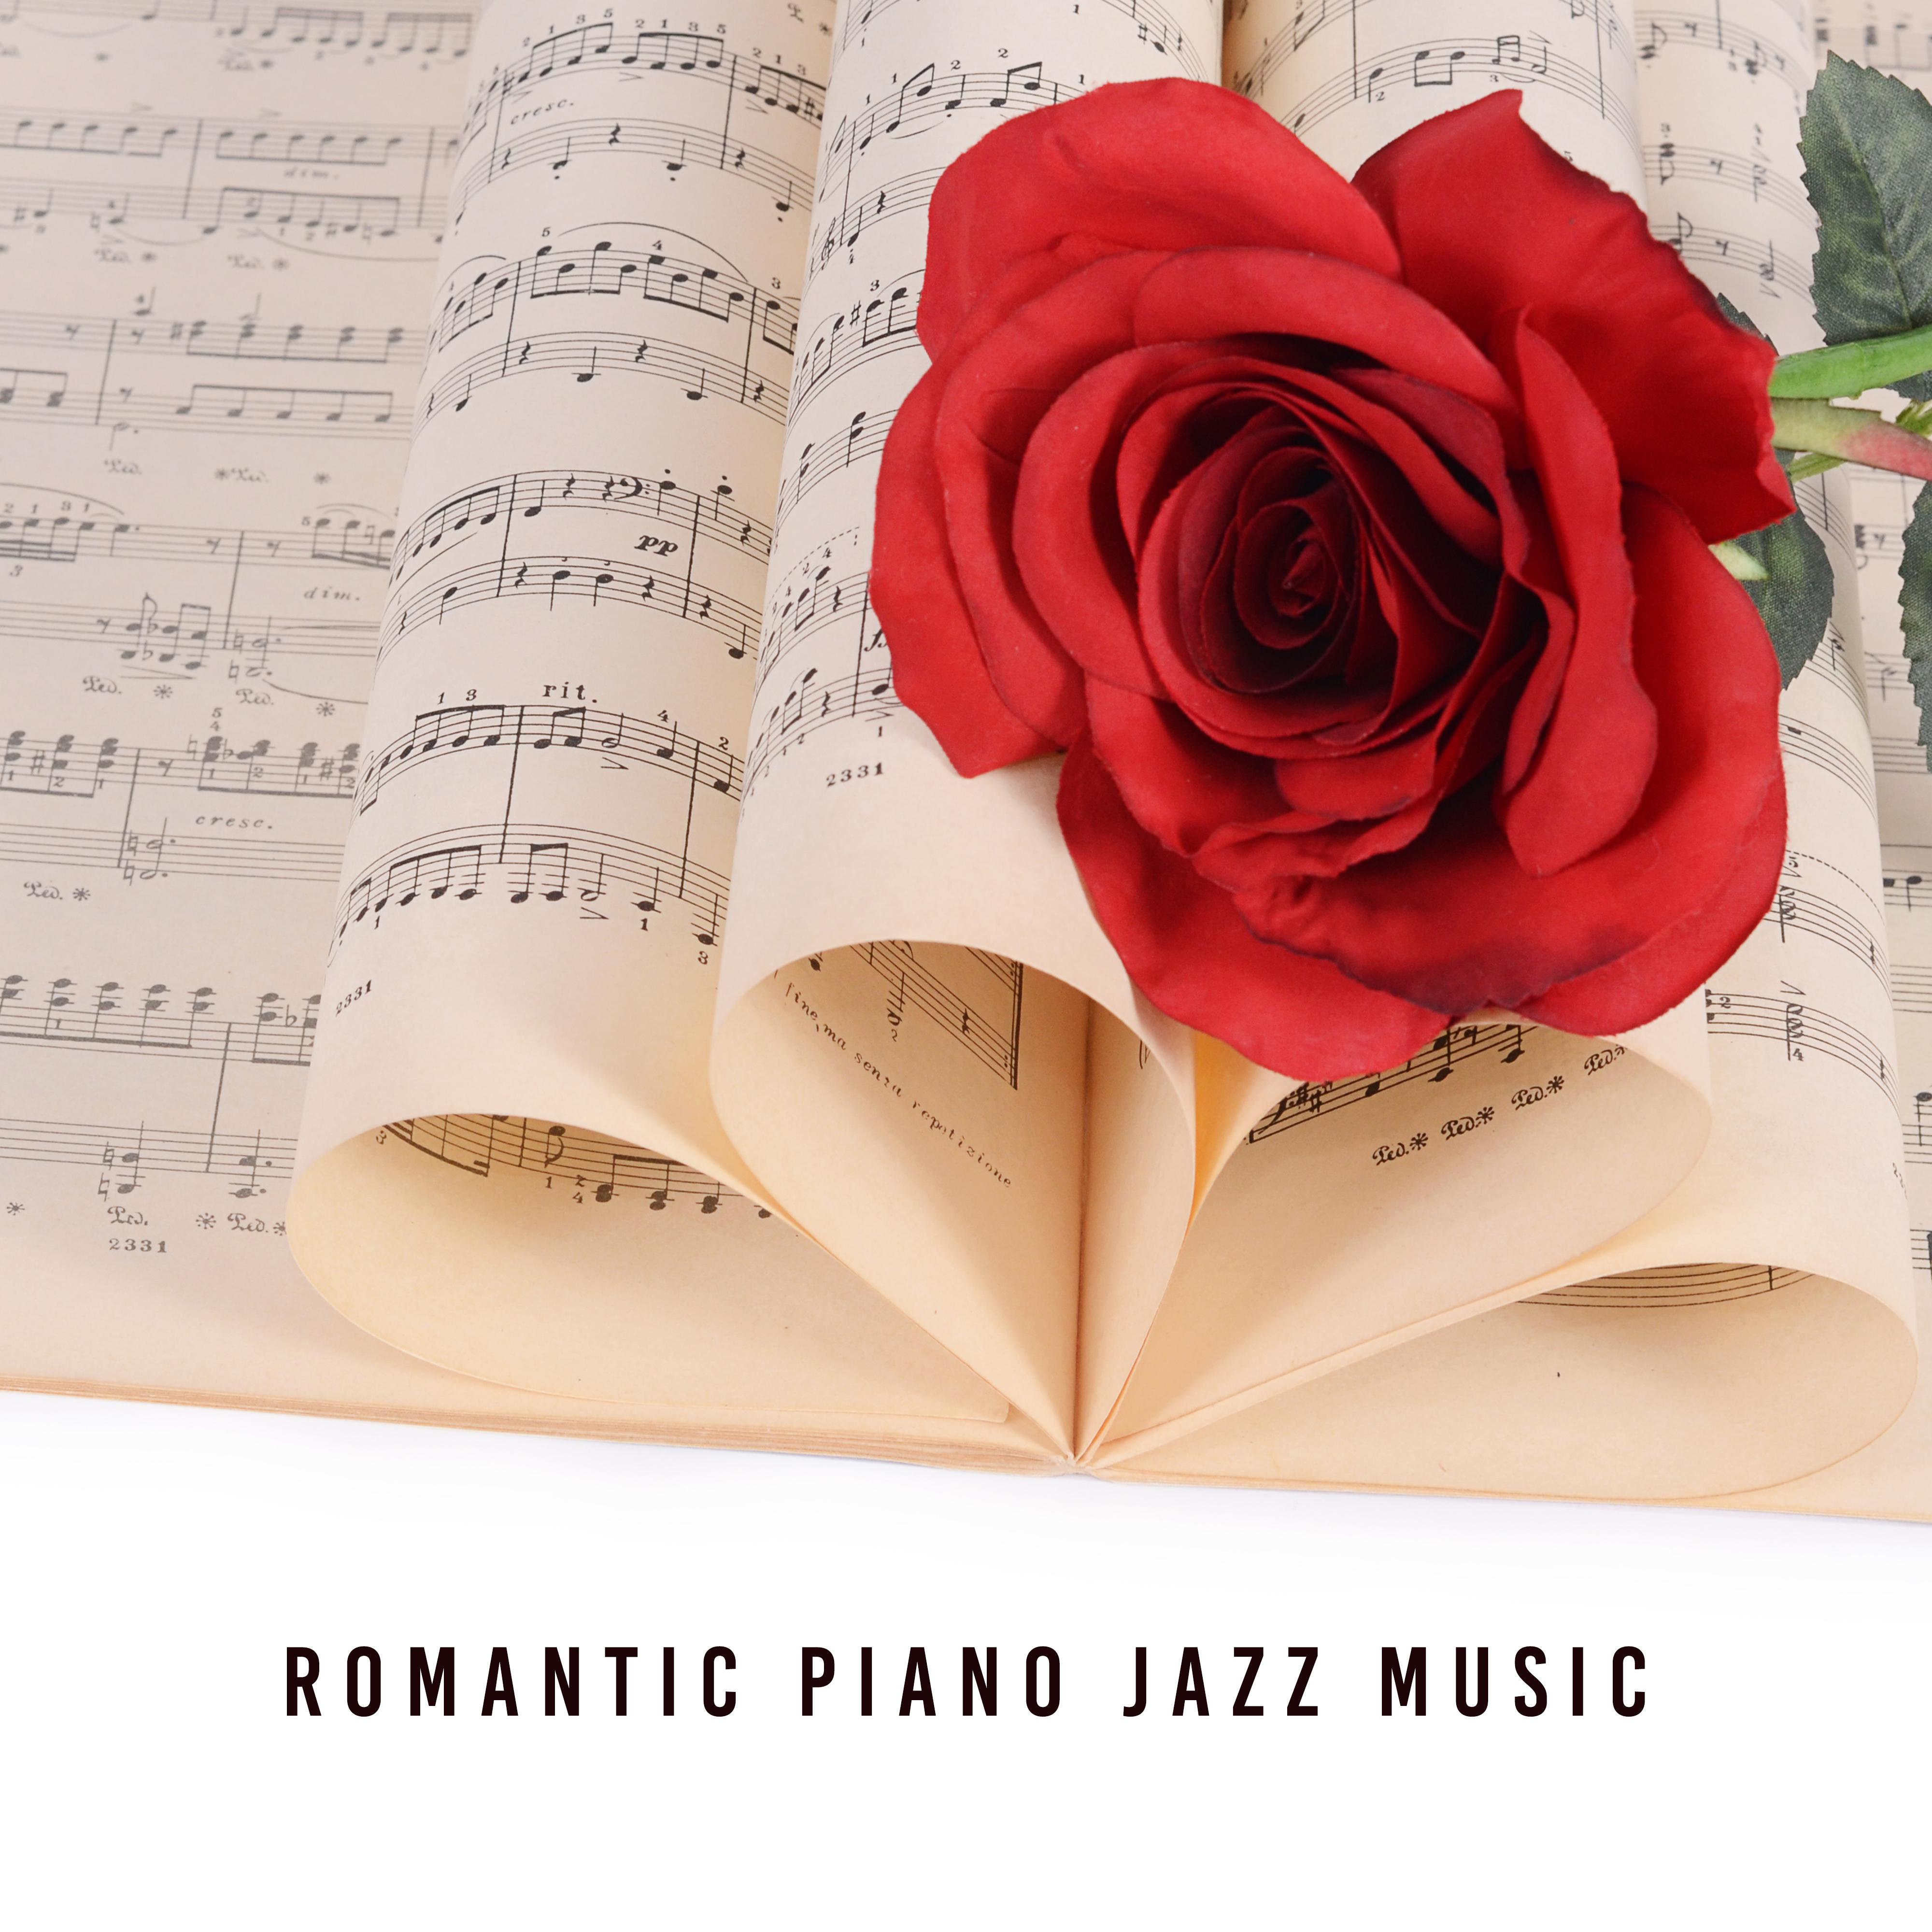 Romantic Piano Jazz Music  Smooth Jazz for Relaxation, Soothing Piano, Calm Jazz Collection, Jazz Relaxation, Instrumental Sounds for Lovers, Mellow Jazz 2019